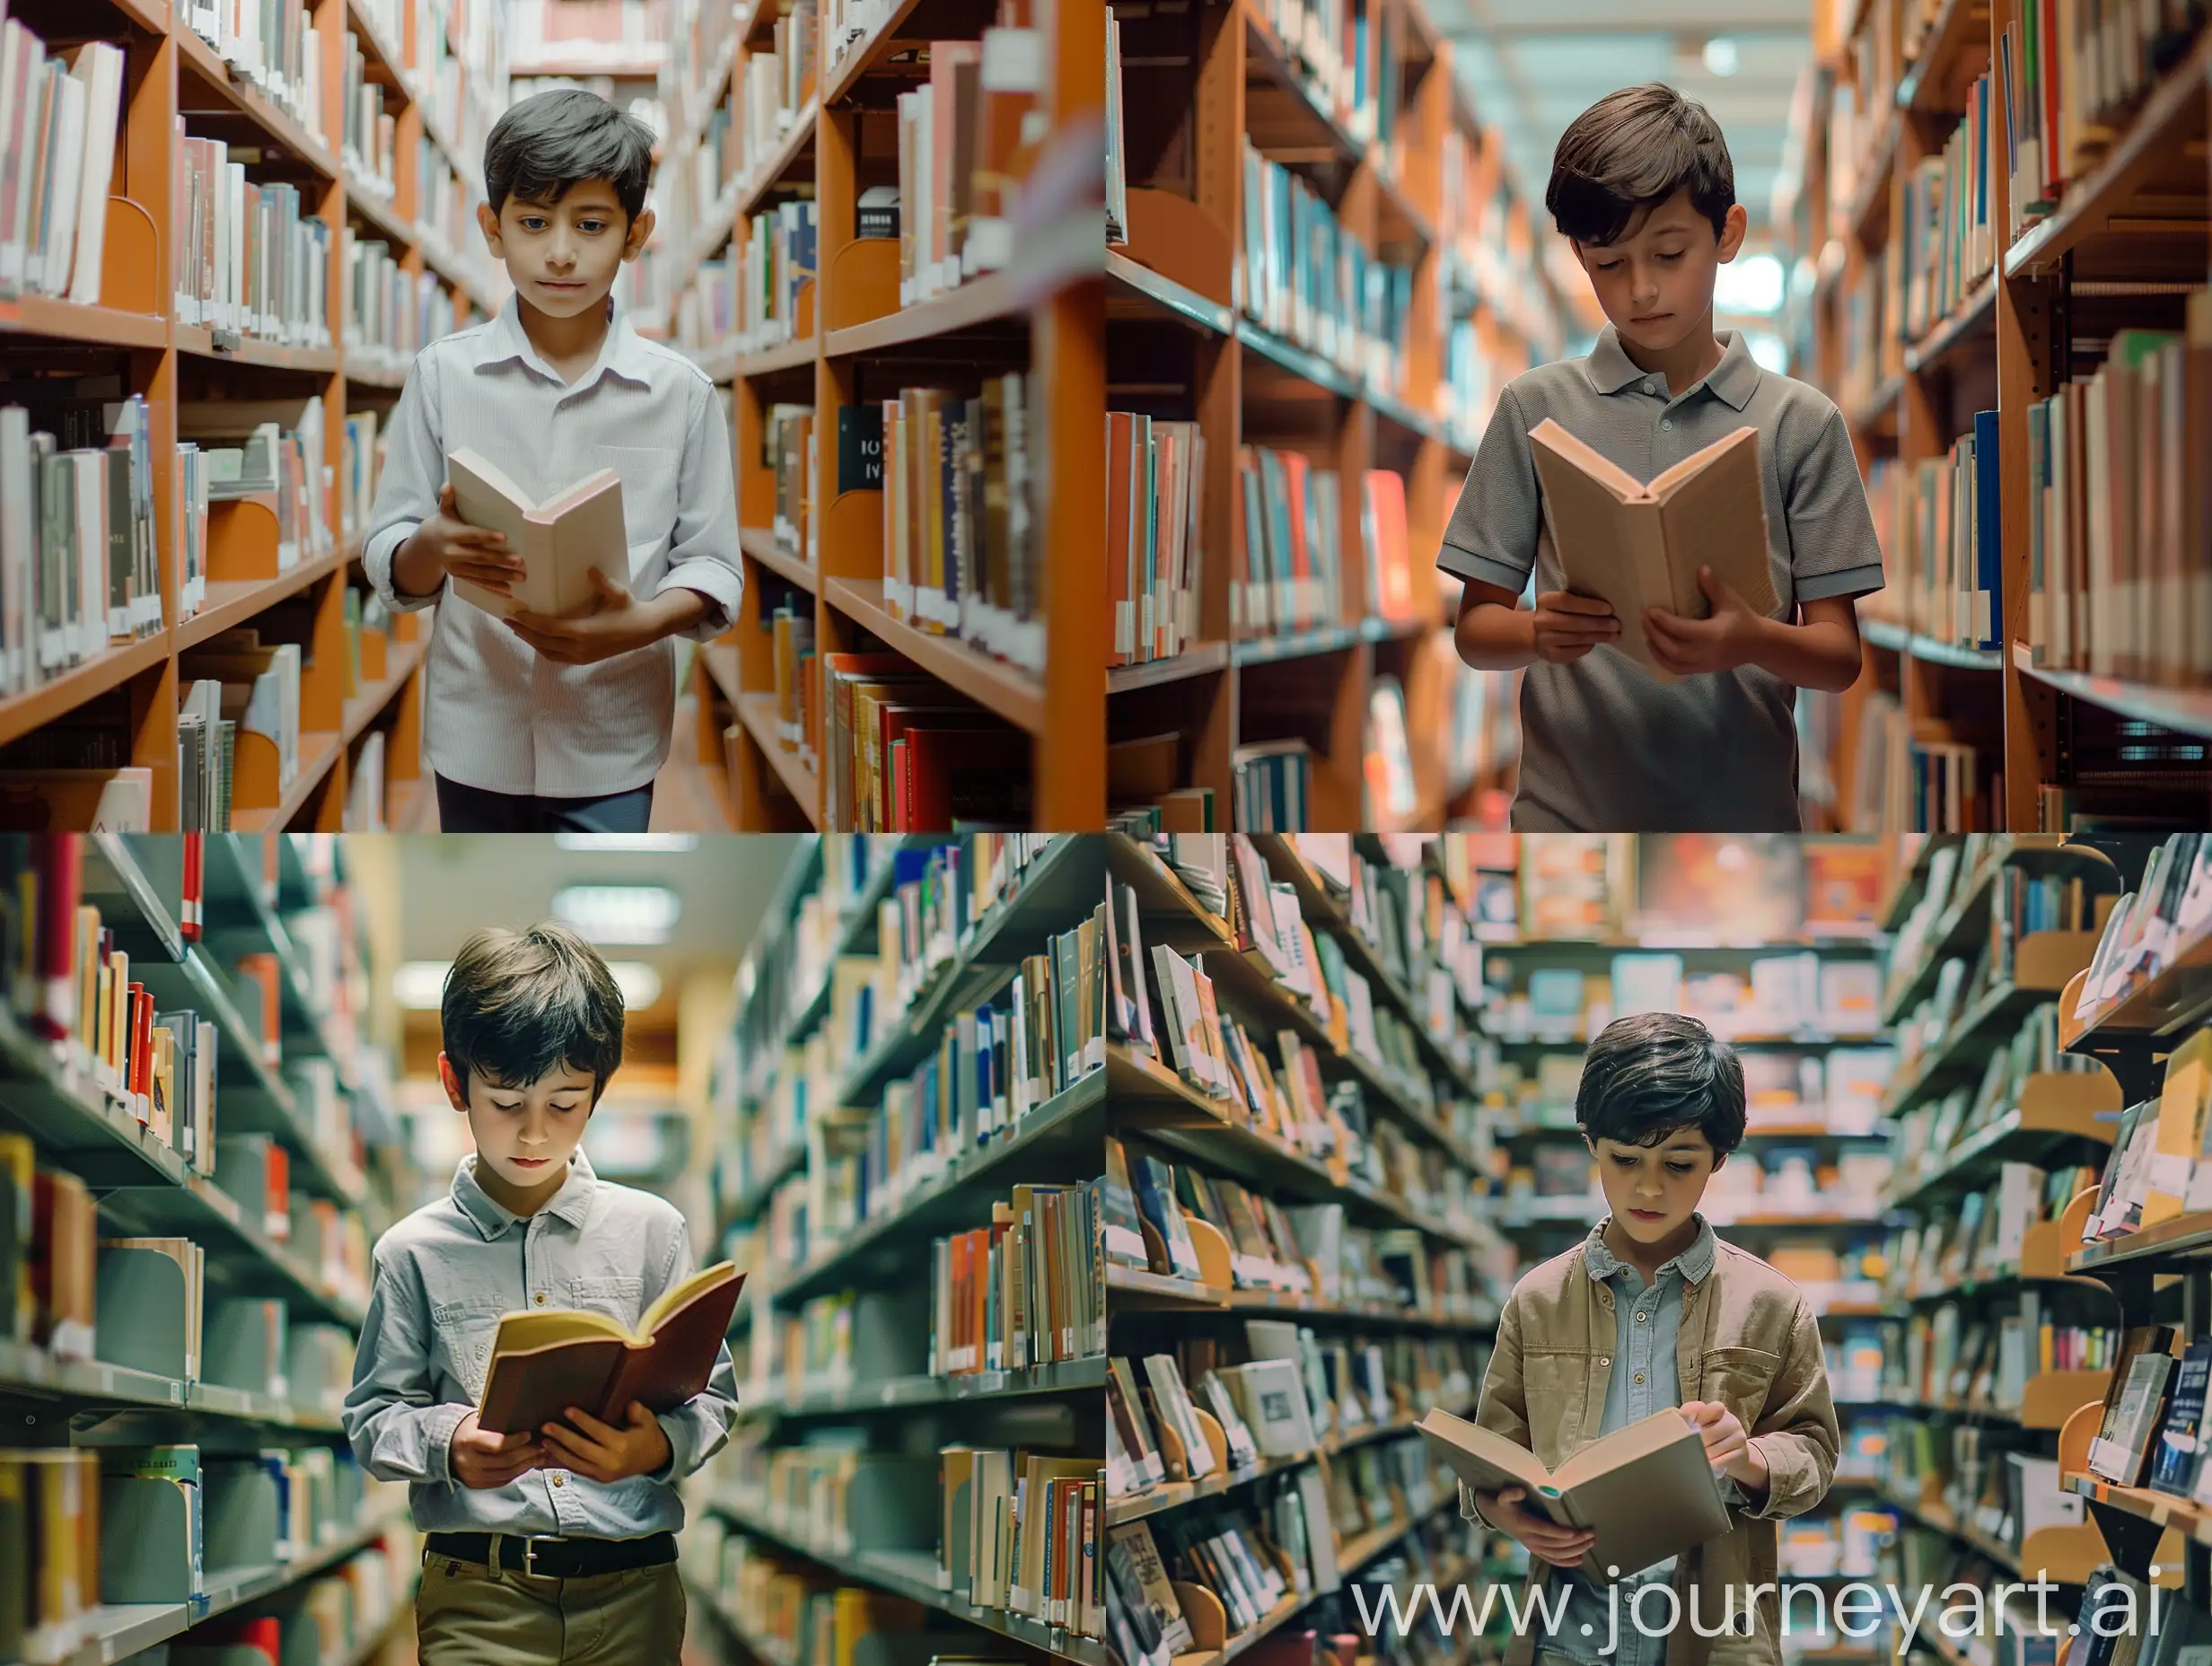 Enthusiastic-Boy-Immersed-in-Reading-Adventure-Amid-Library-Bookshelves